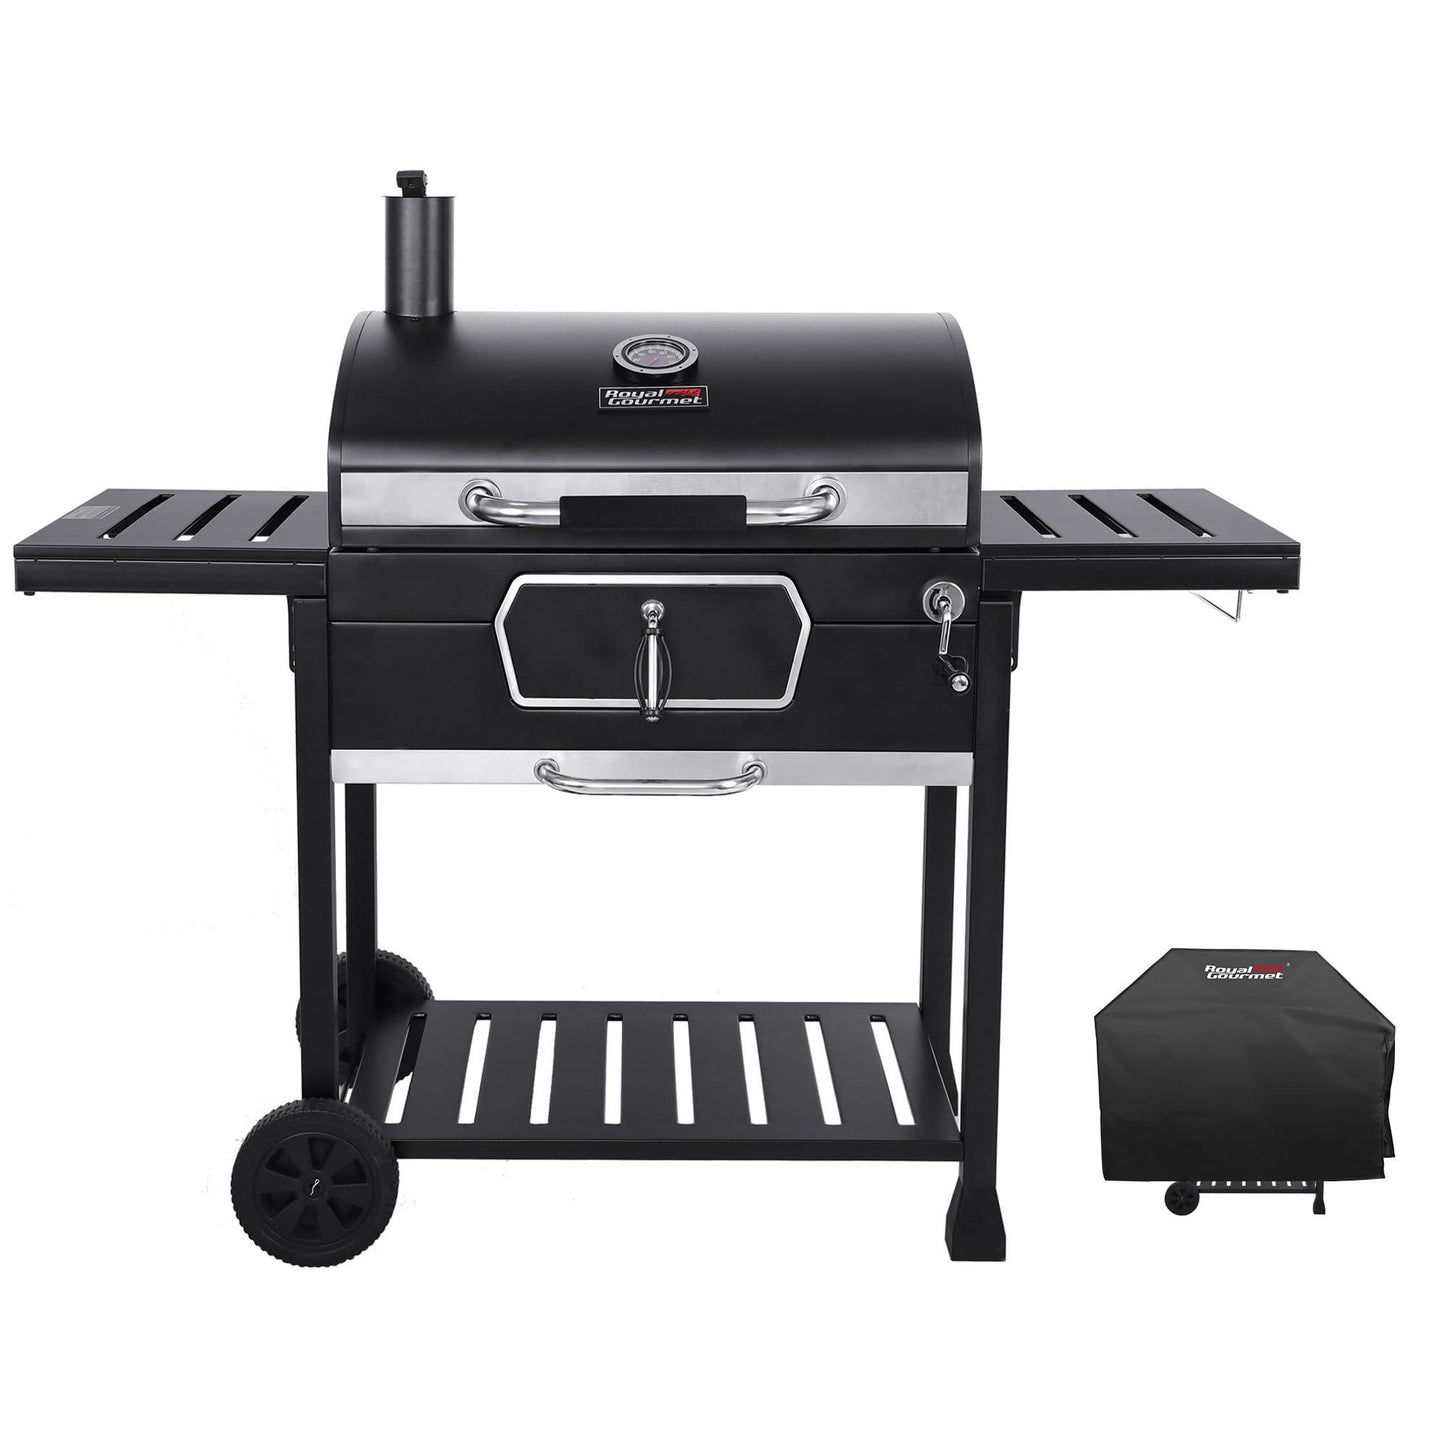 Royal Gourmet CD2030AC Deluxe 30-Inch Large Charcoal Grill with Cover, Charcoal BBQ Grill for Picnic Camping Patio Backyard Cooking and Grill Cover, Black - CookCave